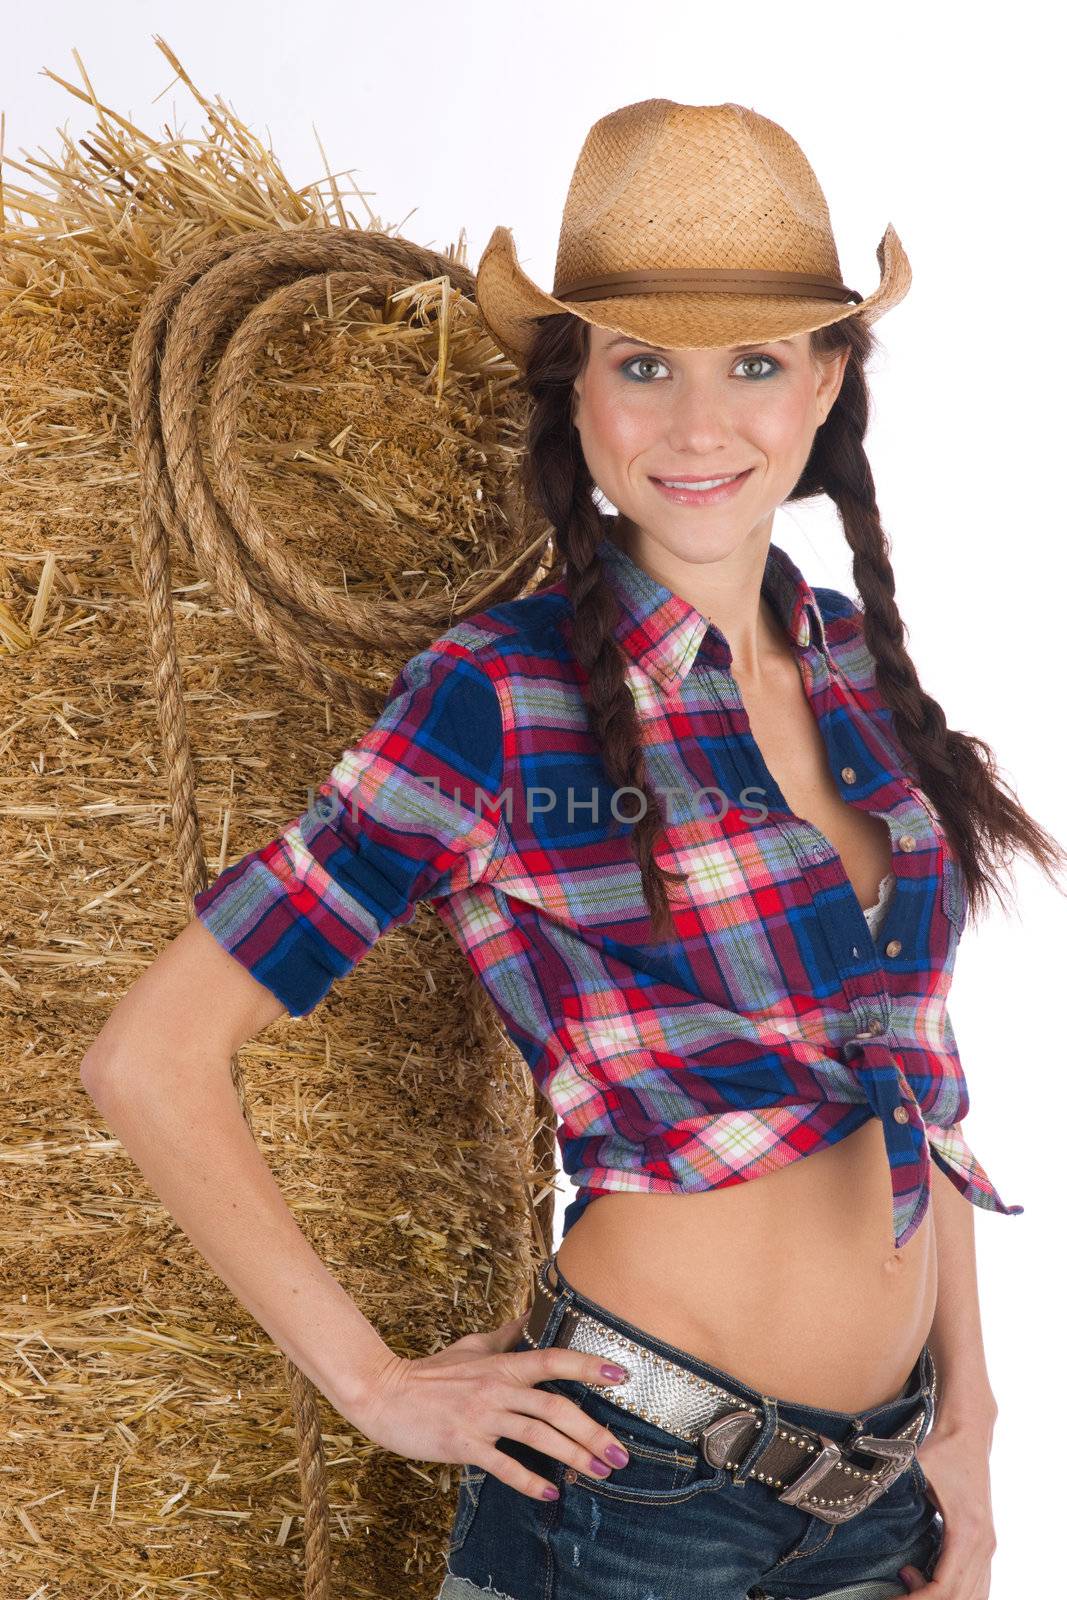 Girl from the West by a bale of hay